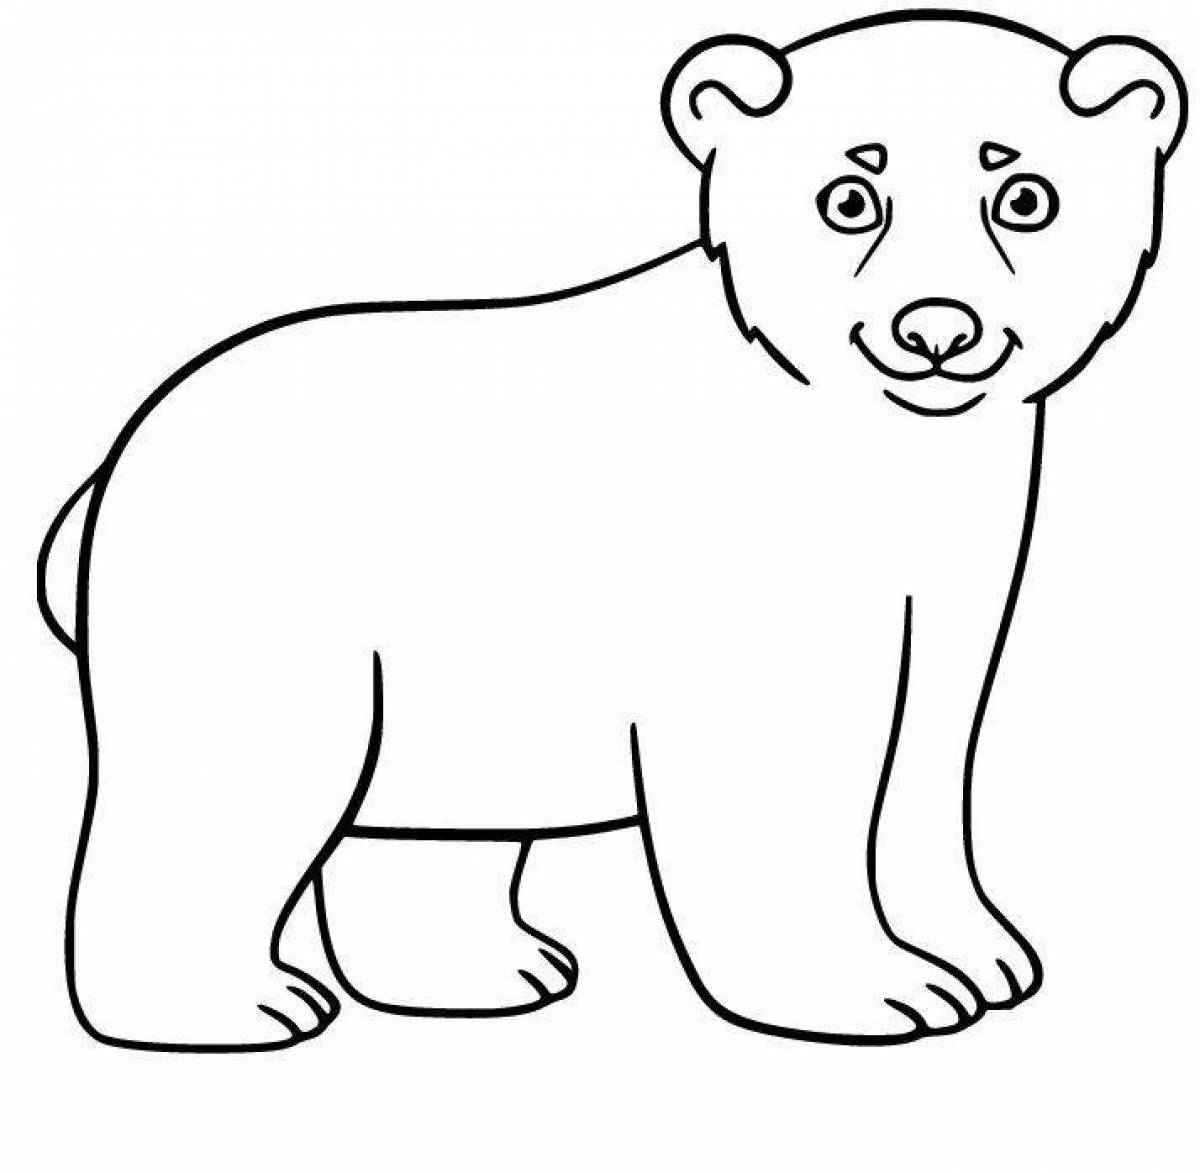 Friendly white teddy bear coloring book